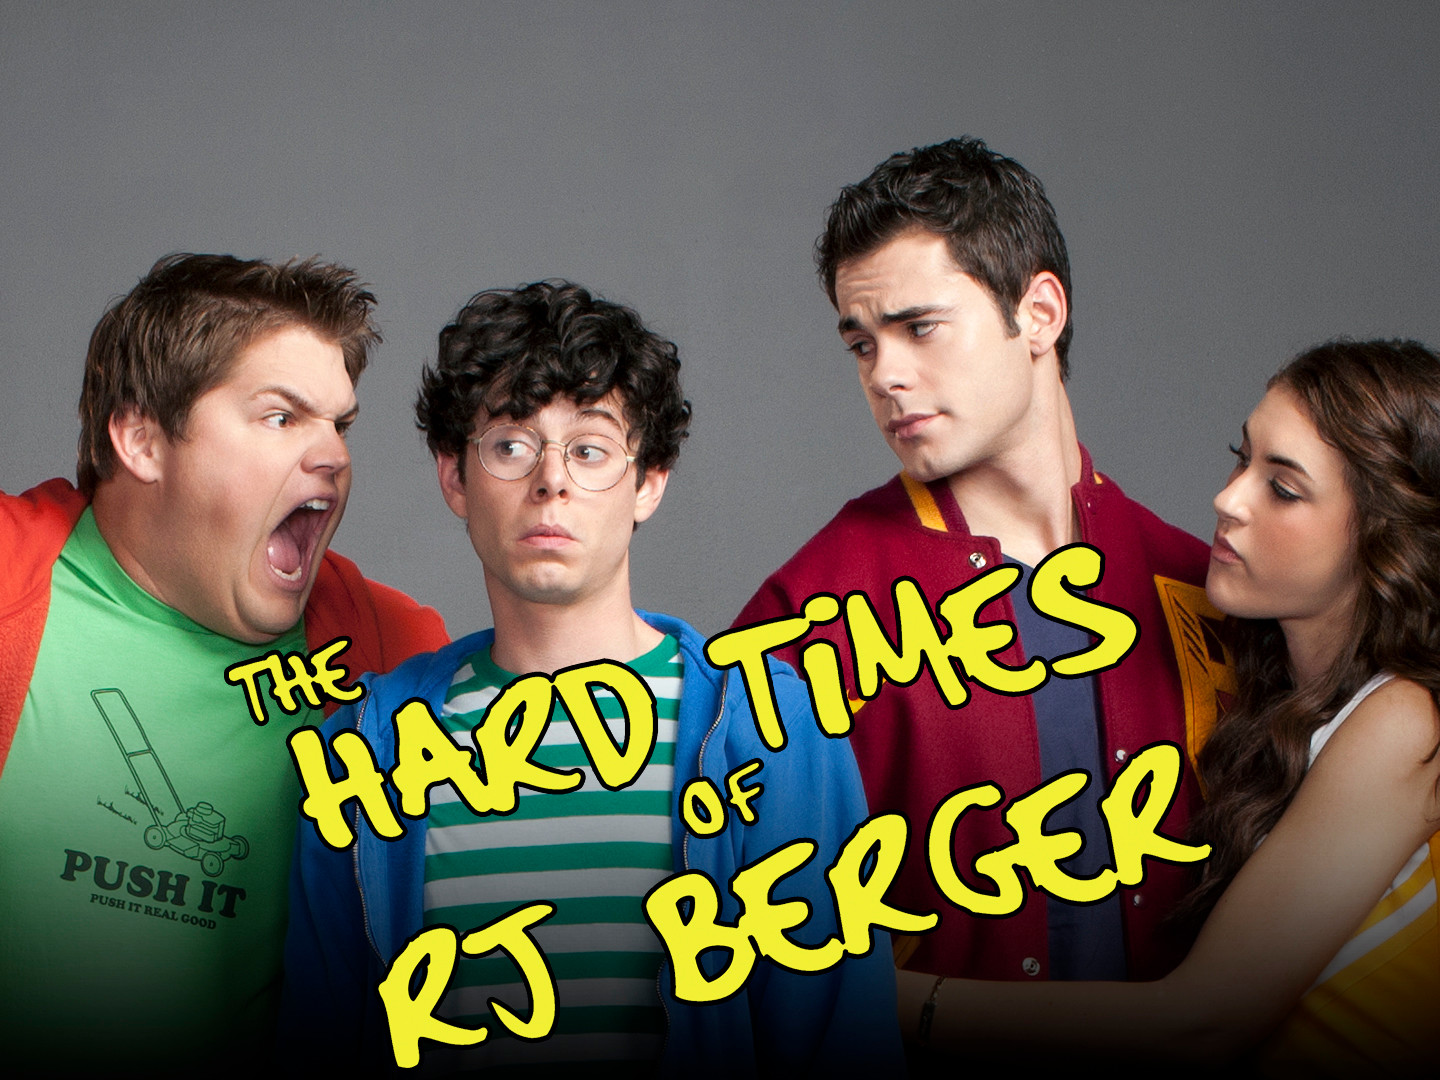 The Hard Times Of Rj Berger Wallpapers